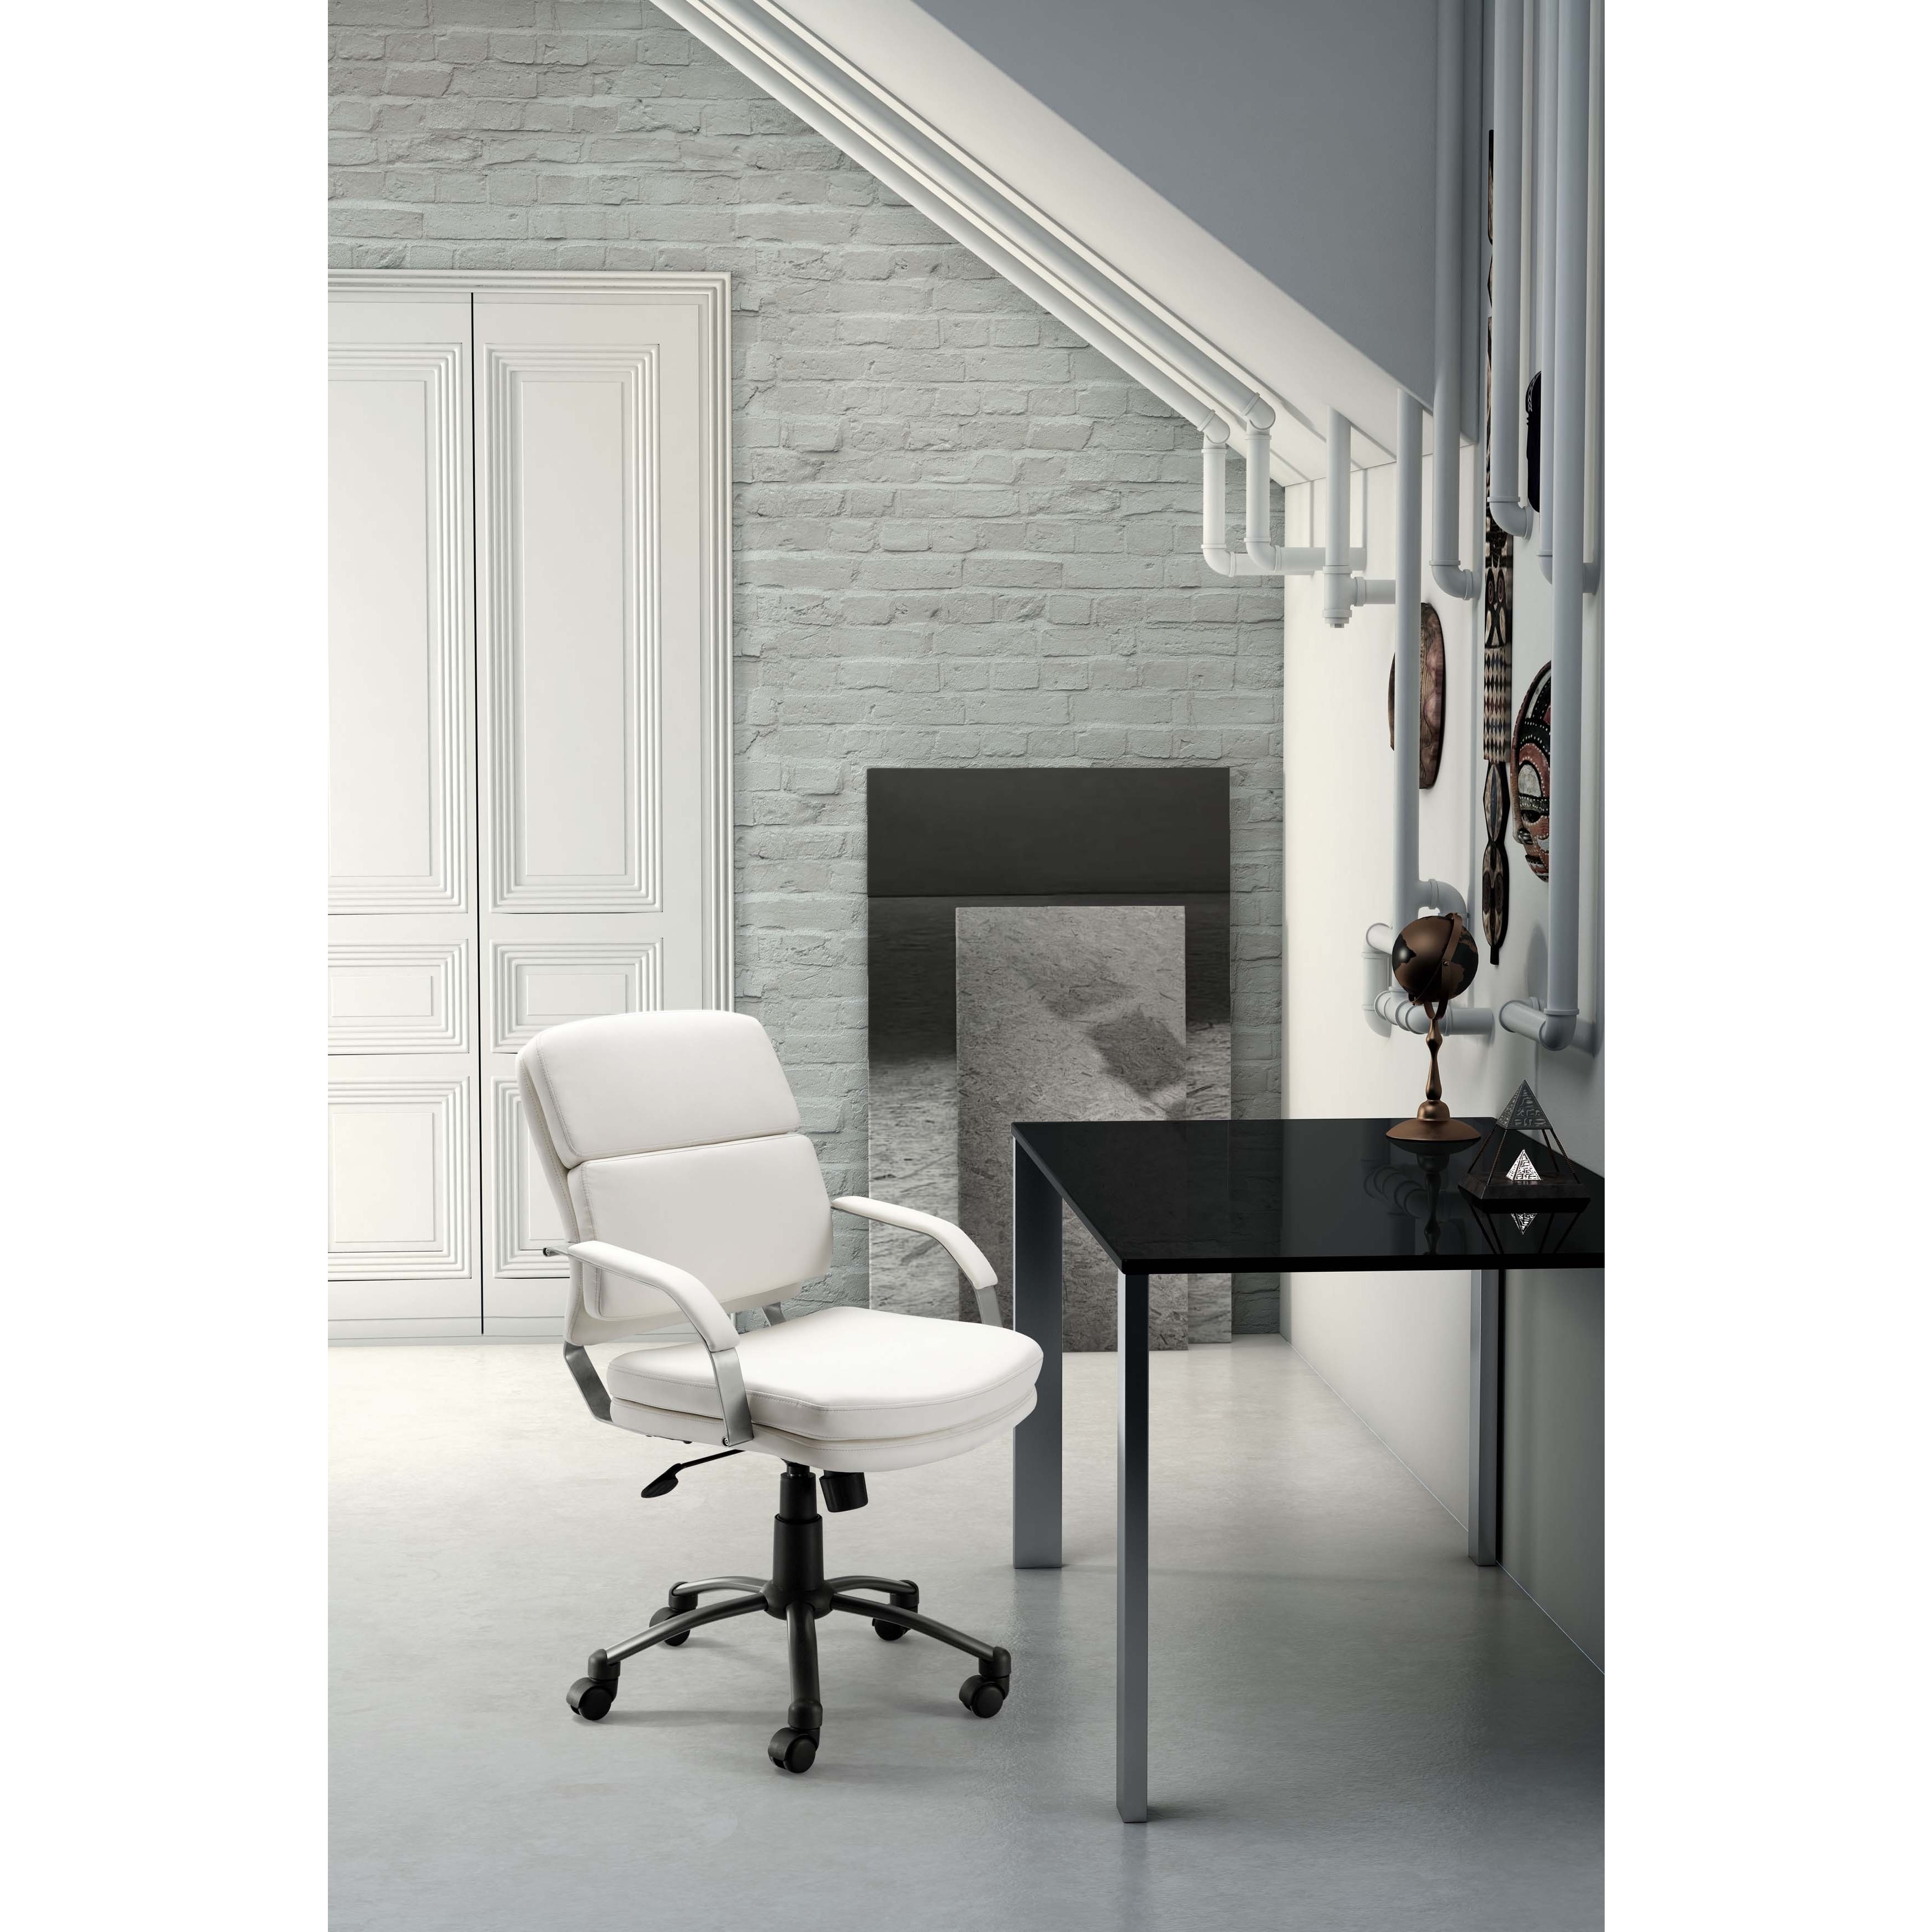 Director Relax White Office Chair (WhiteMaterials Steel, leatheretteFinish LeatheretteSeat height 20 to 24 inches high Adjustable height YesWheels YesDimensions 38 to 42 inches high x 25.5 inches wide x 25.5 inches deepSeat Dimensions 20 to 24 inch